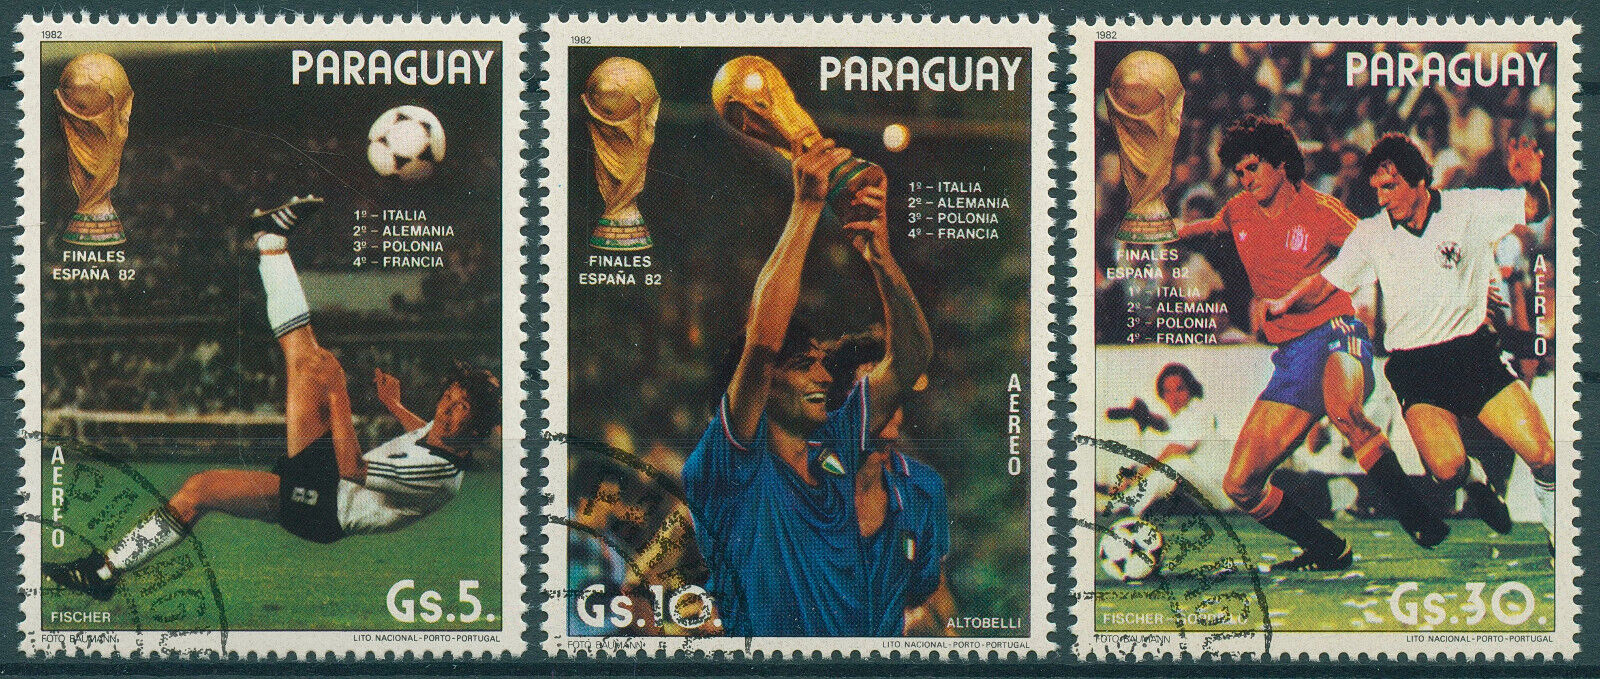 Paraguay 1982 CTO Sports Stamps Football World Cup Spain '82 Soccer 3v Set